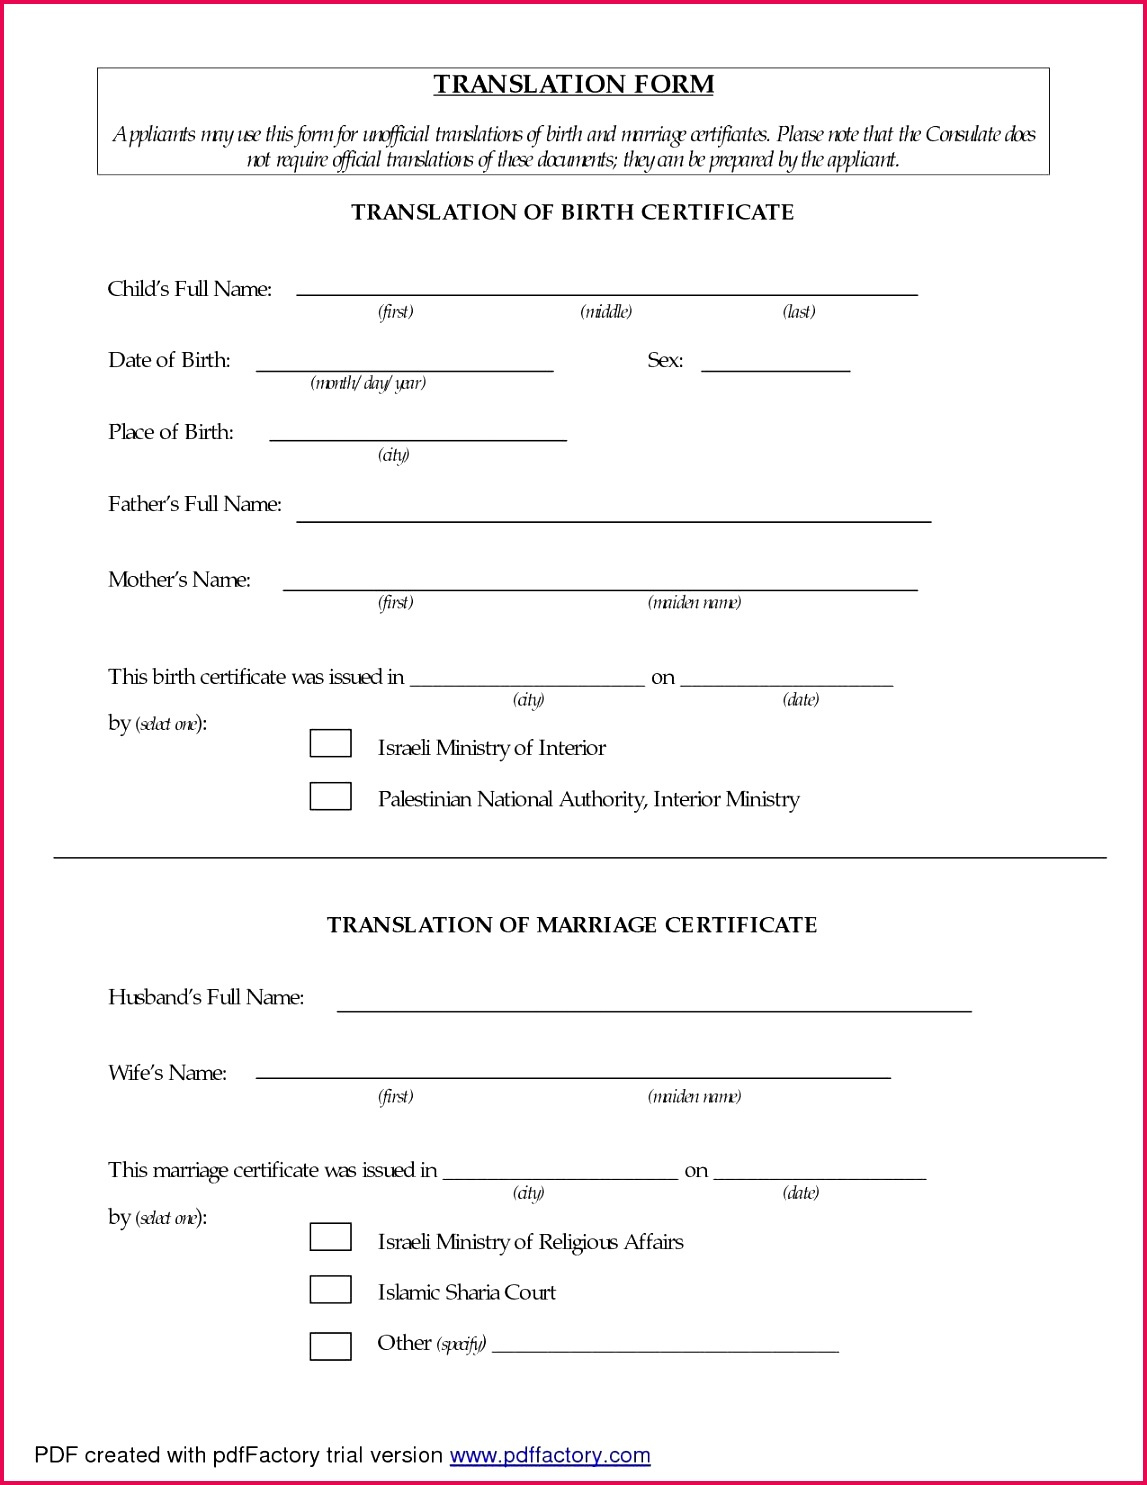 5 Birth Certificate Translation Template Pdf 93987 for Spanish To English Birth Certificate Translation Template